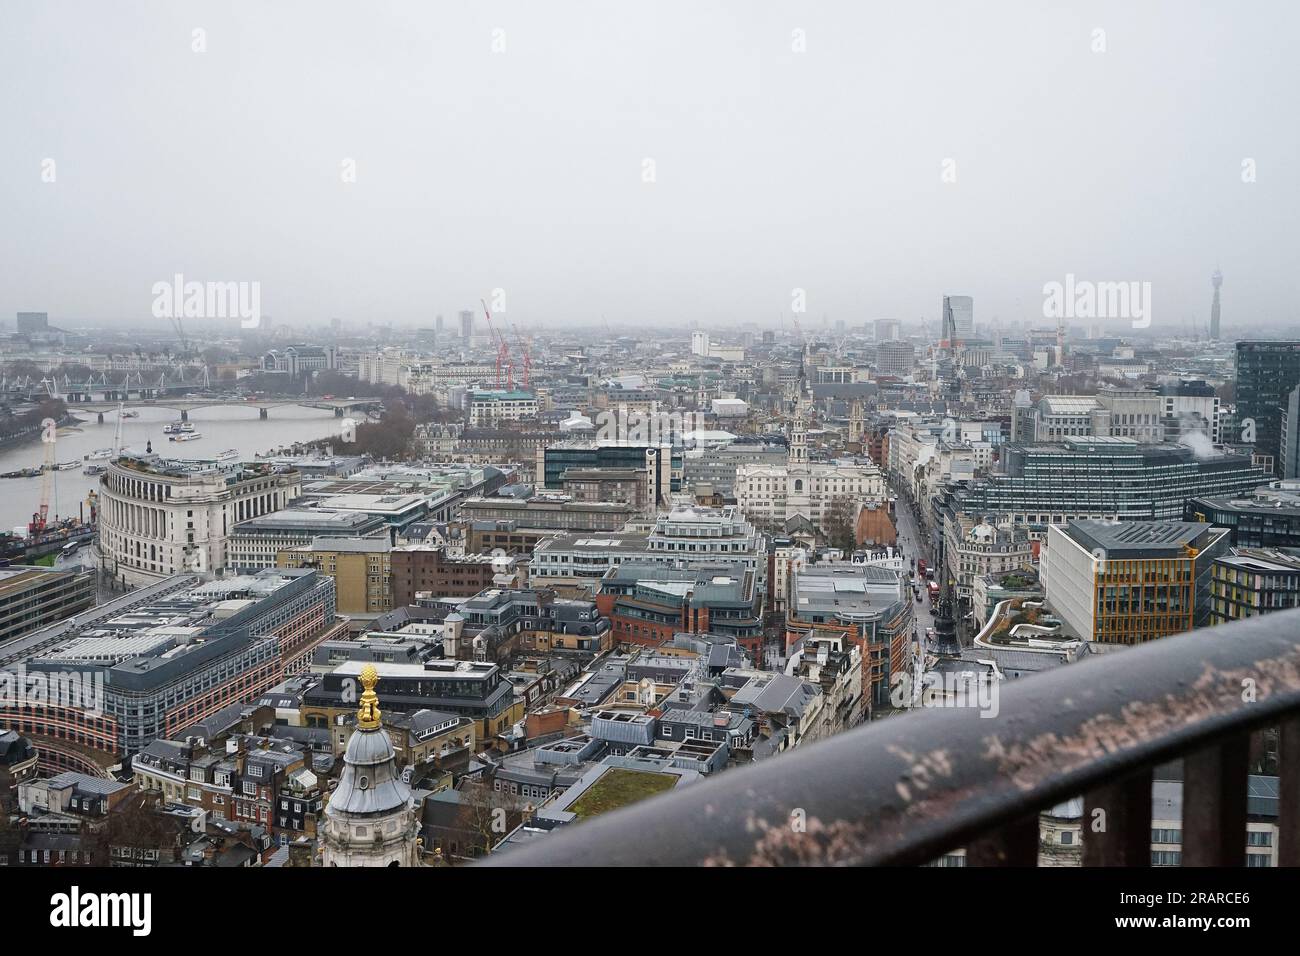 Exterior architecture and design of Top aerial view of London cityscape and skyline from St Paul's Cathedral rooftop Terrace- England, United Kingdom Stock Photo